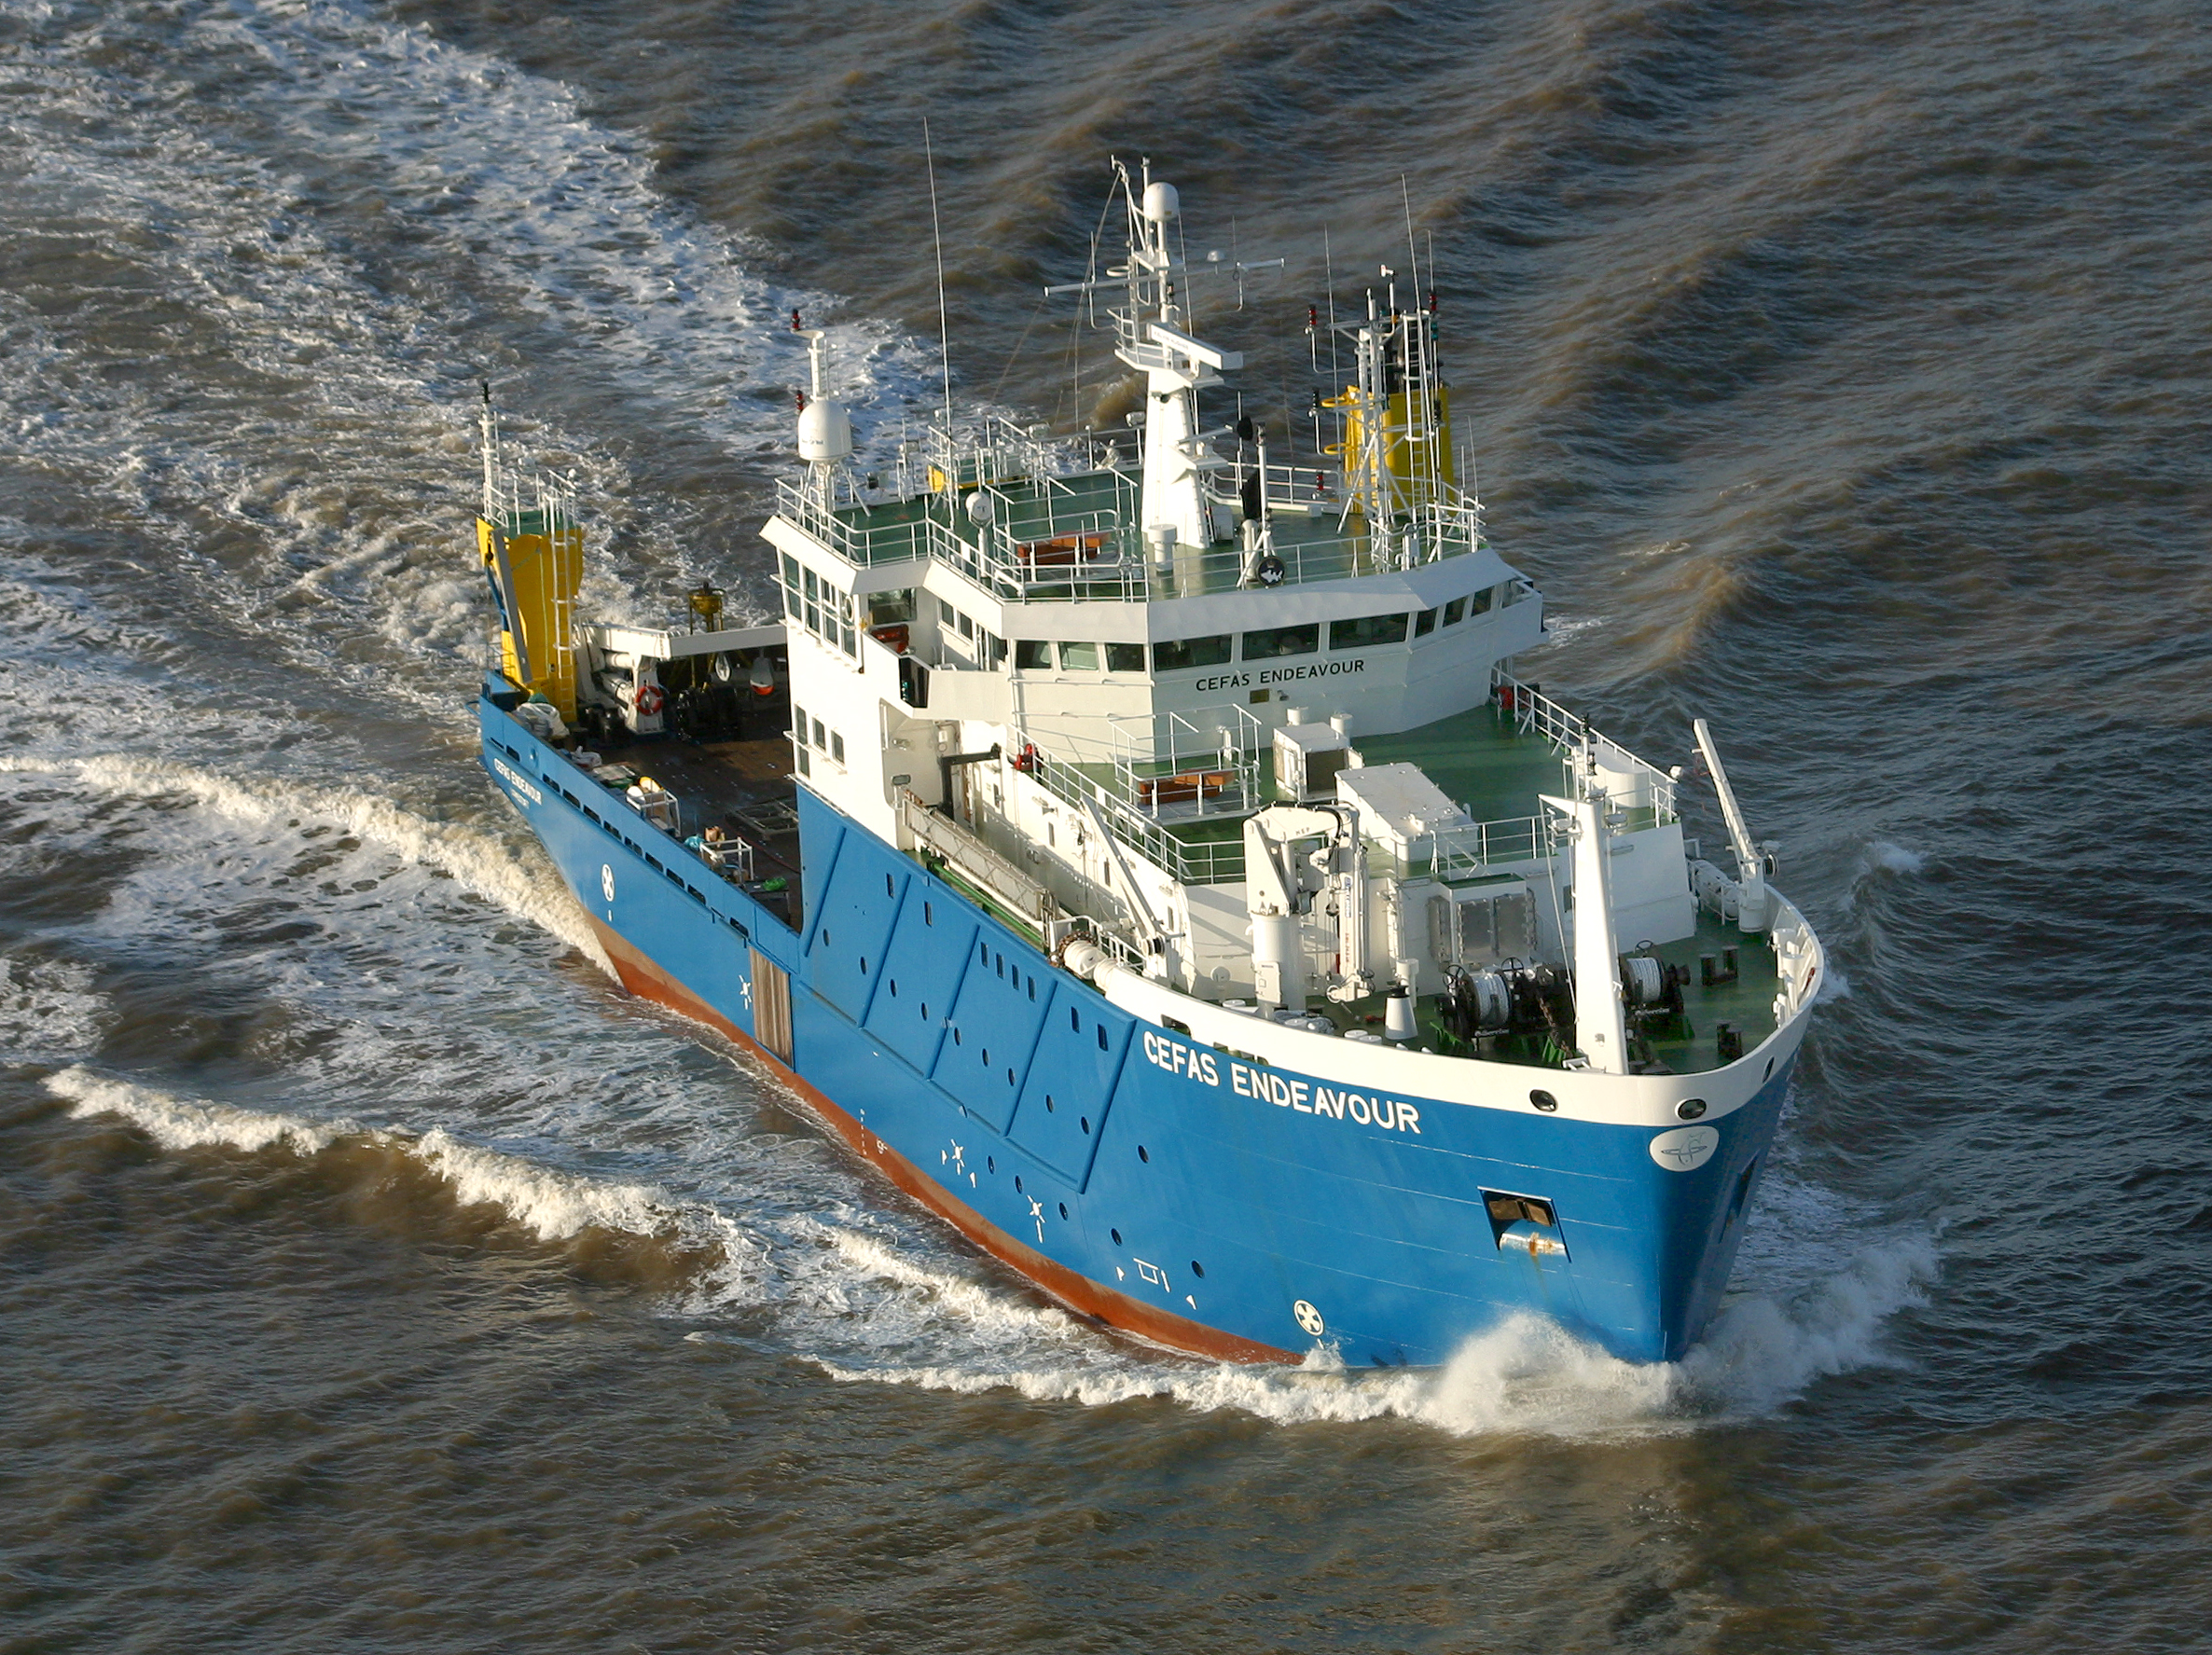 Image of the research vessel Cefas Endeavour sailing